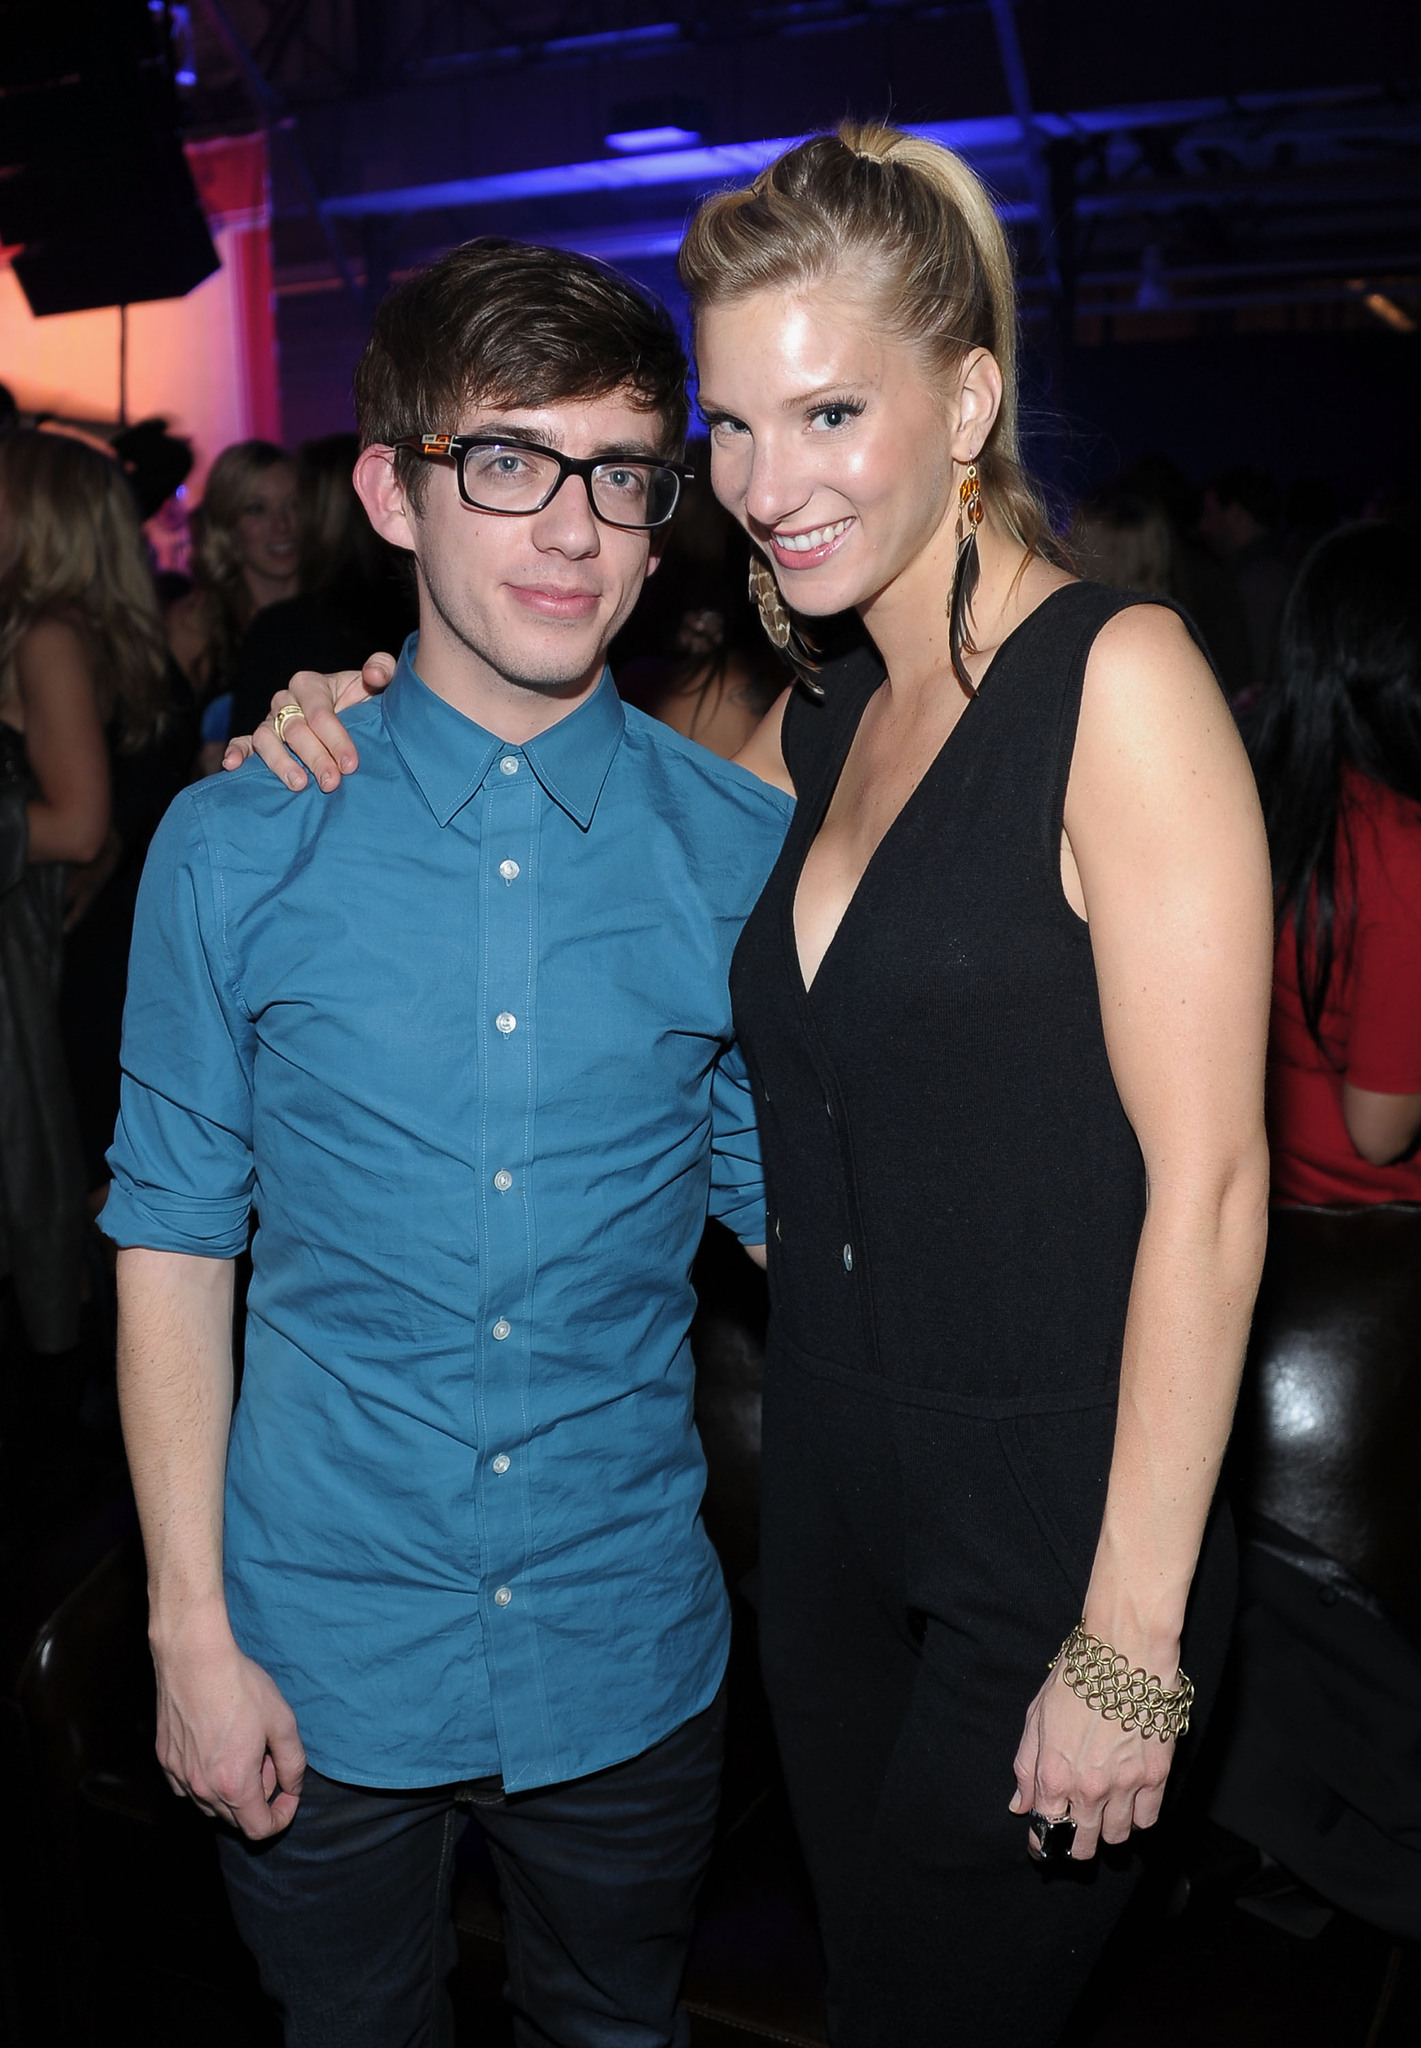 Kevin McHale and Heather Morris